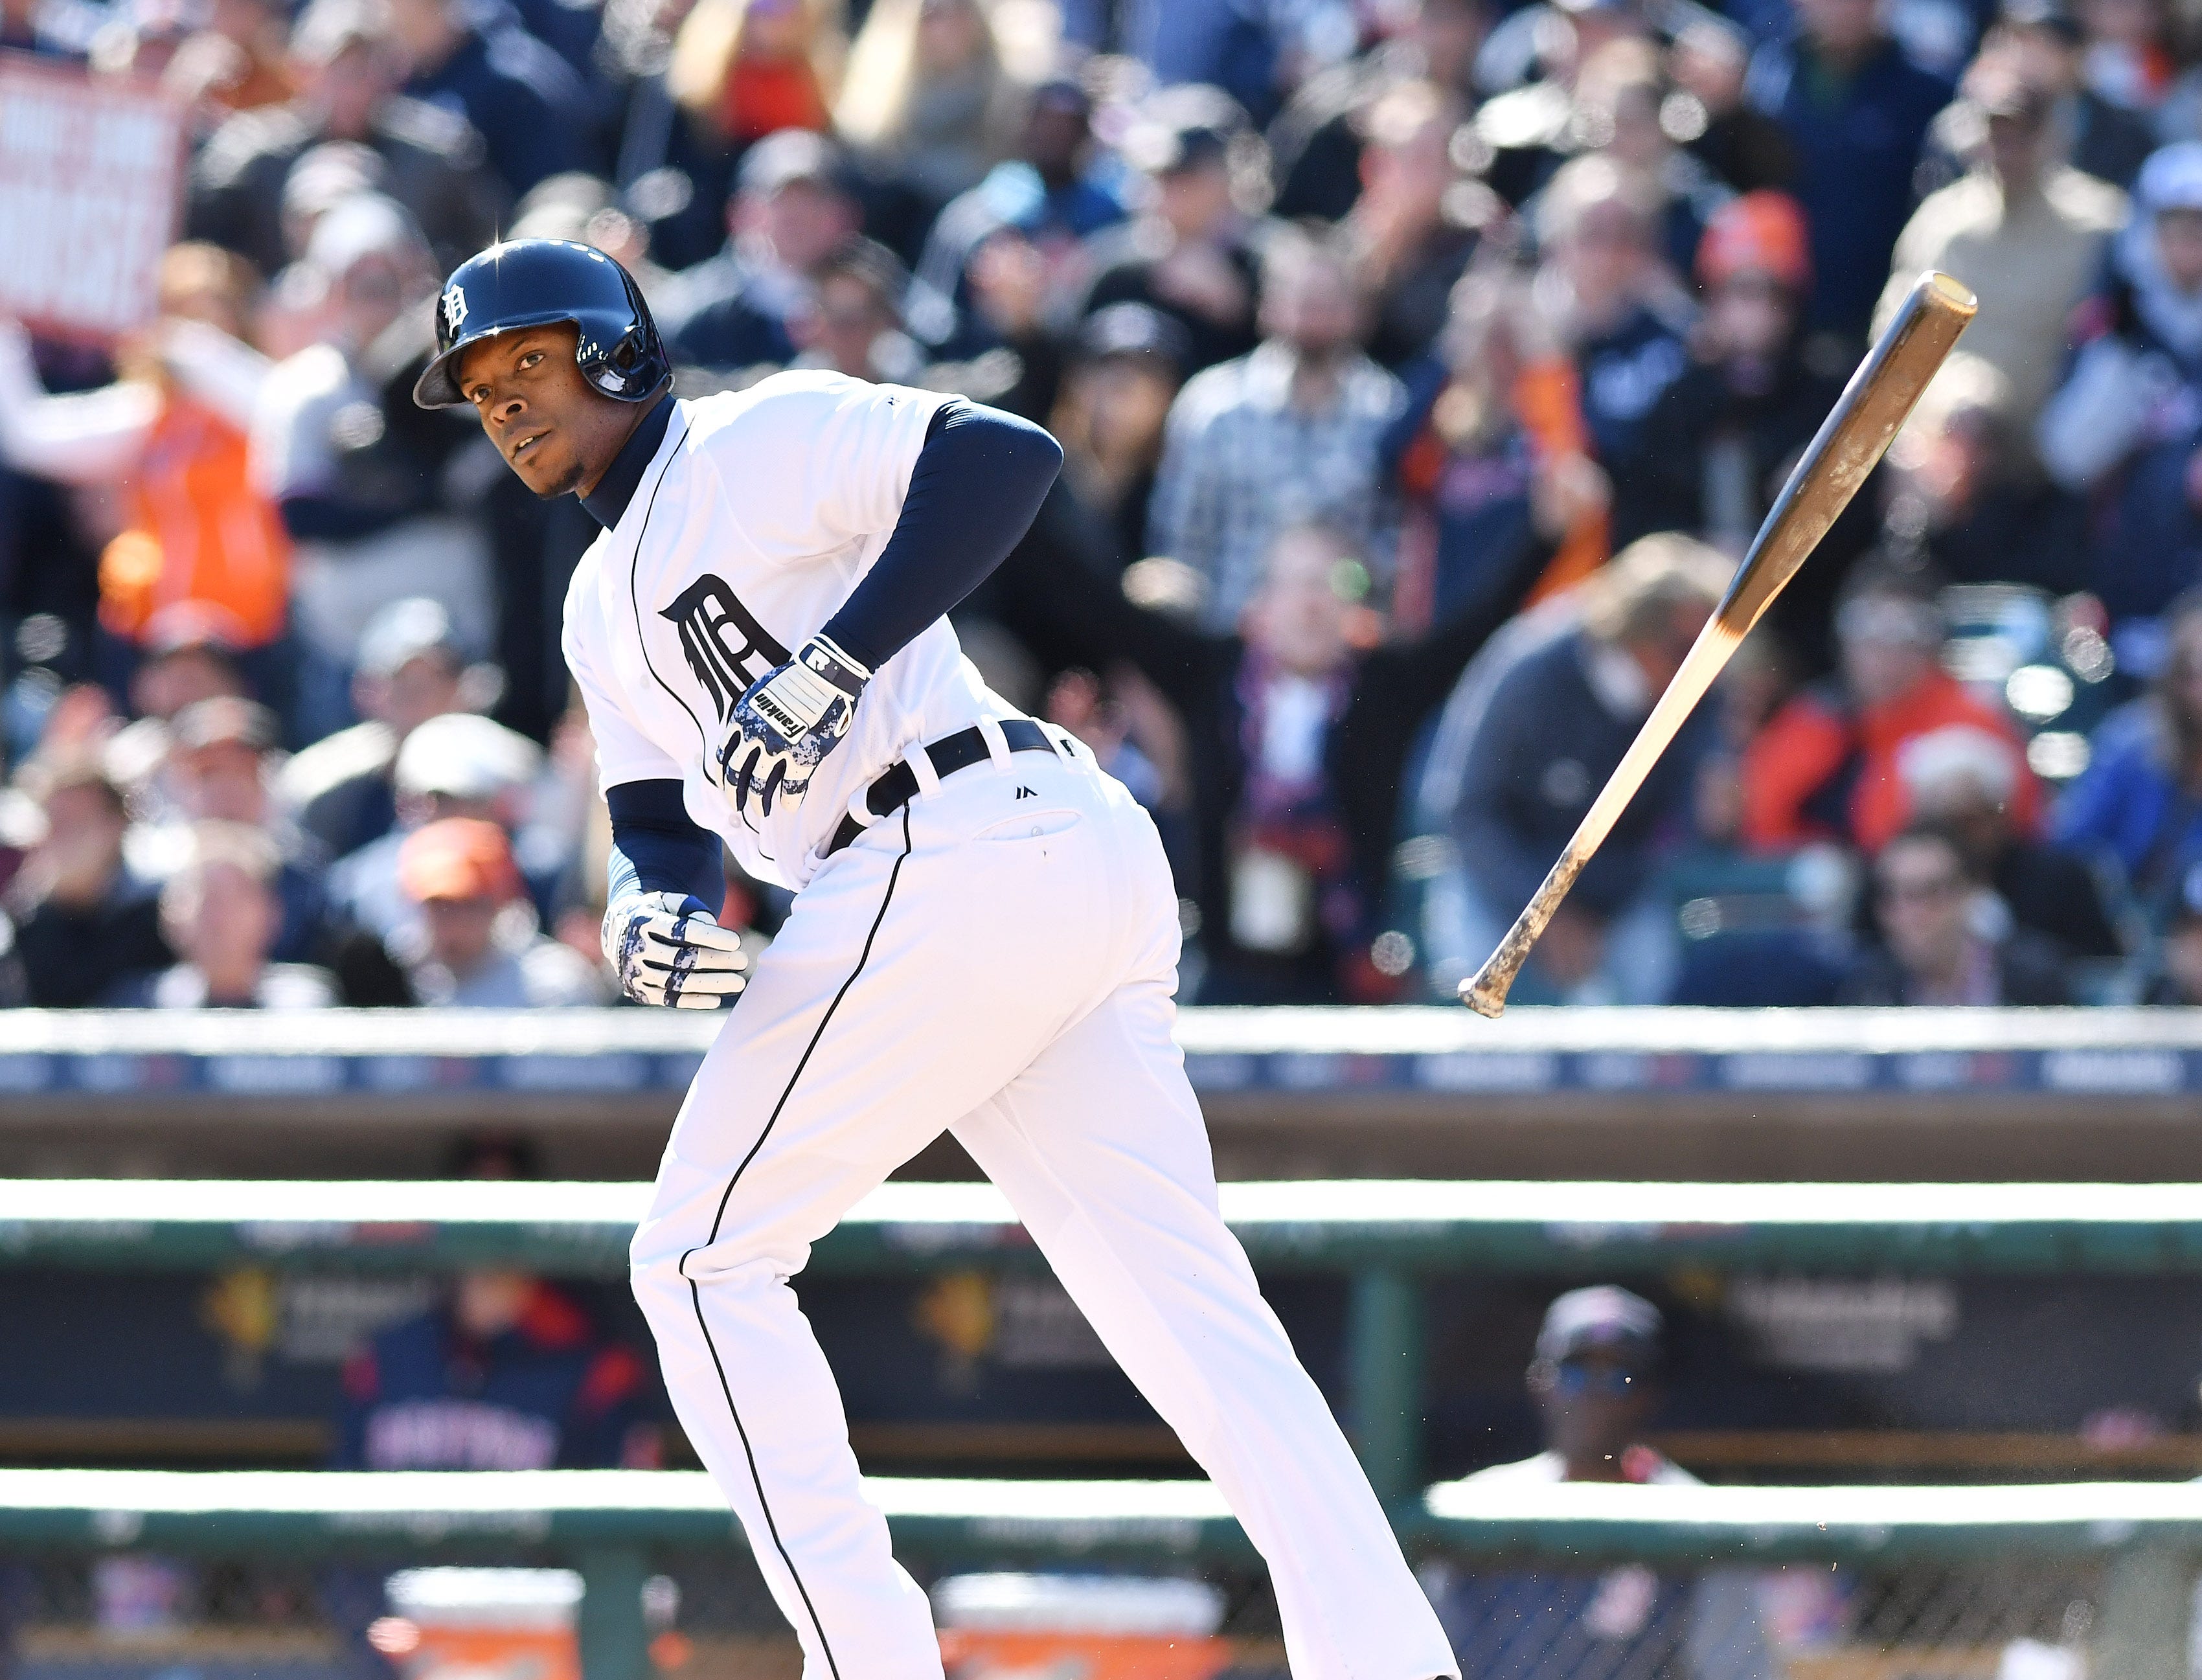 Tigers' Justin Upton draws a walk in the eighth inning. Detroit Tigers vs Boston Red Sox at Tigers Opening Day at Comerica Park in Detroit on April 7, 2017. Tigers win, 6-5.